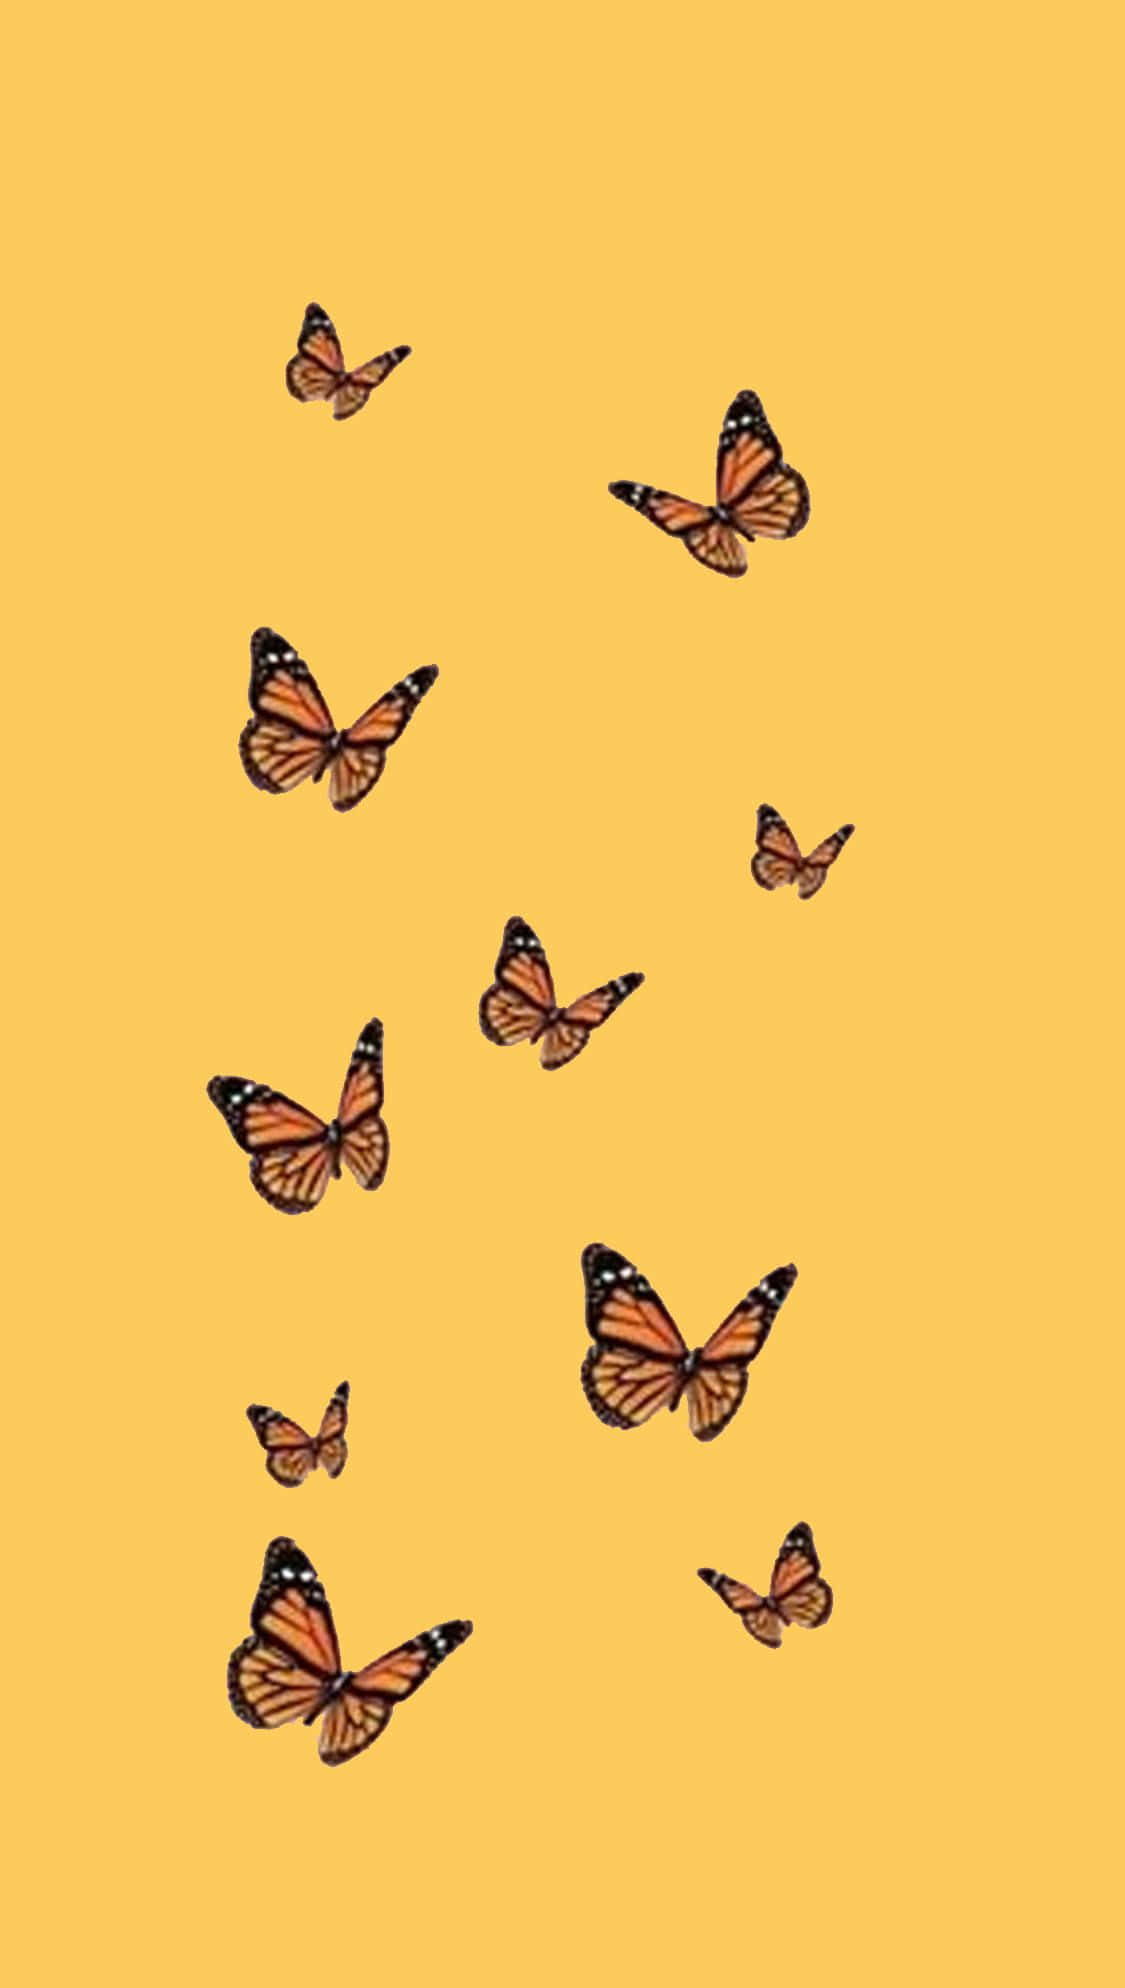 Illustrated beauty of a butterfly Wallpaper